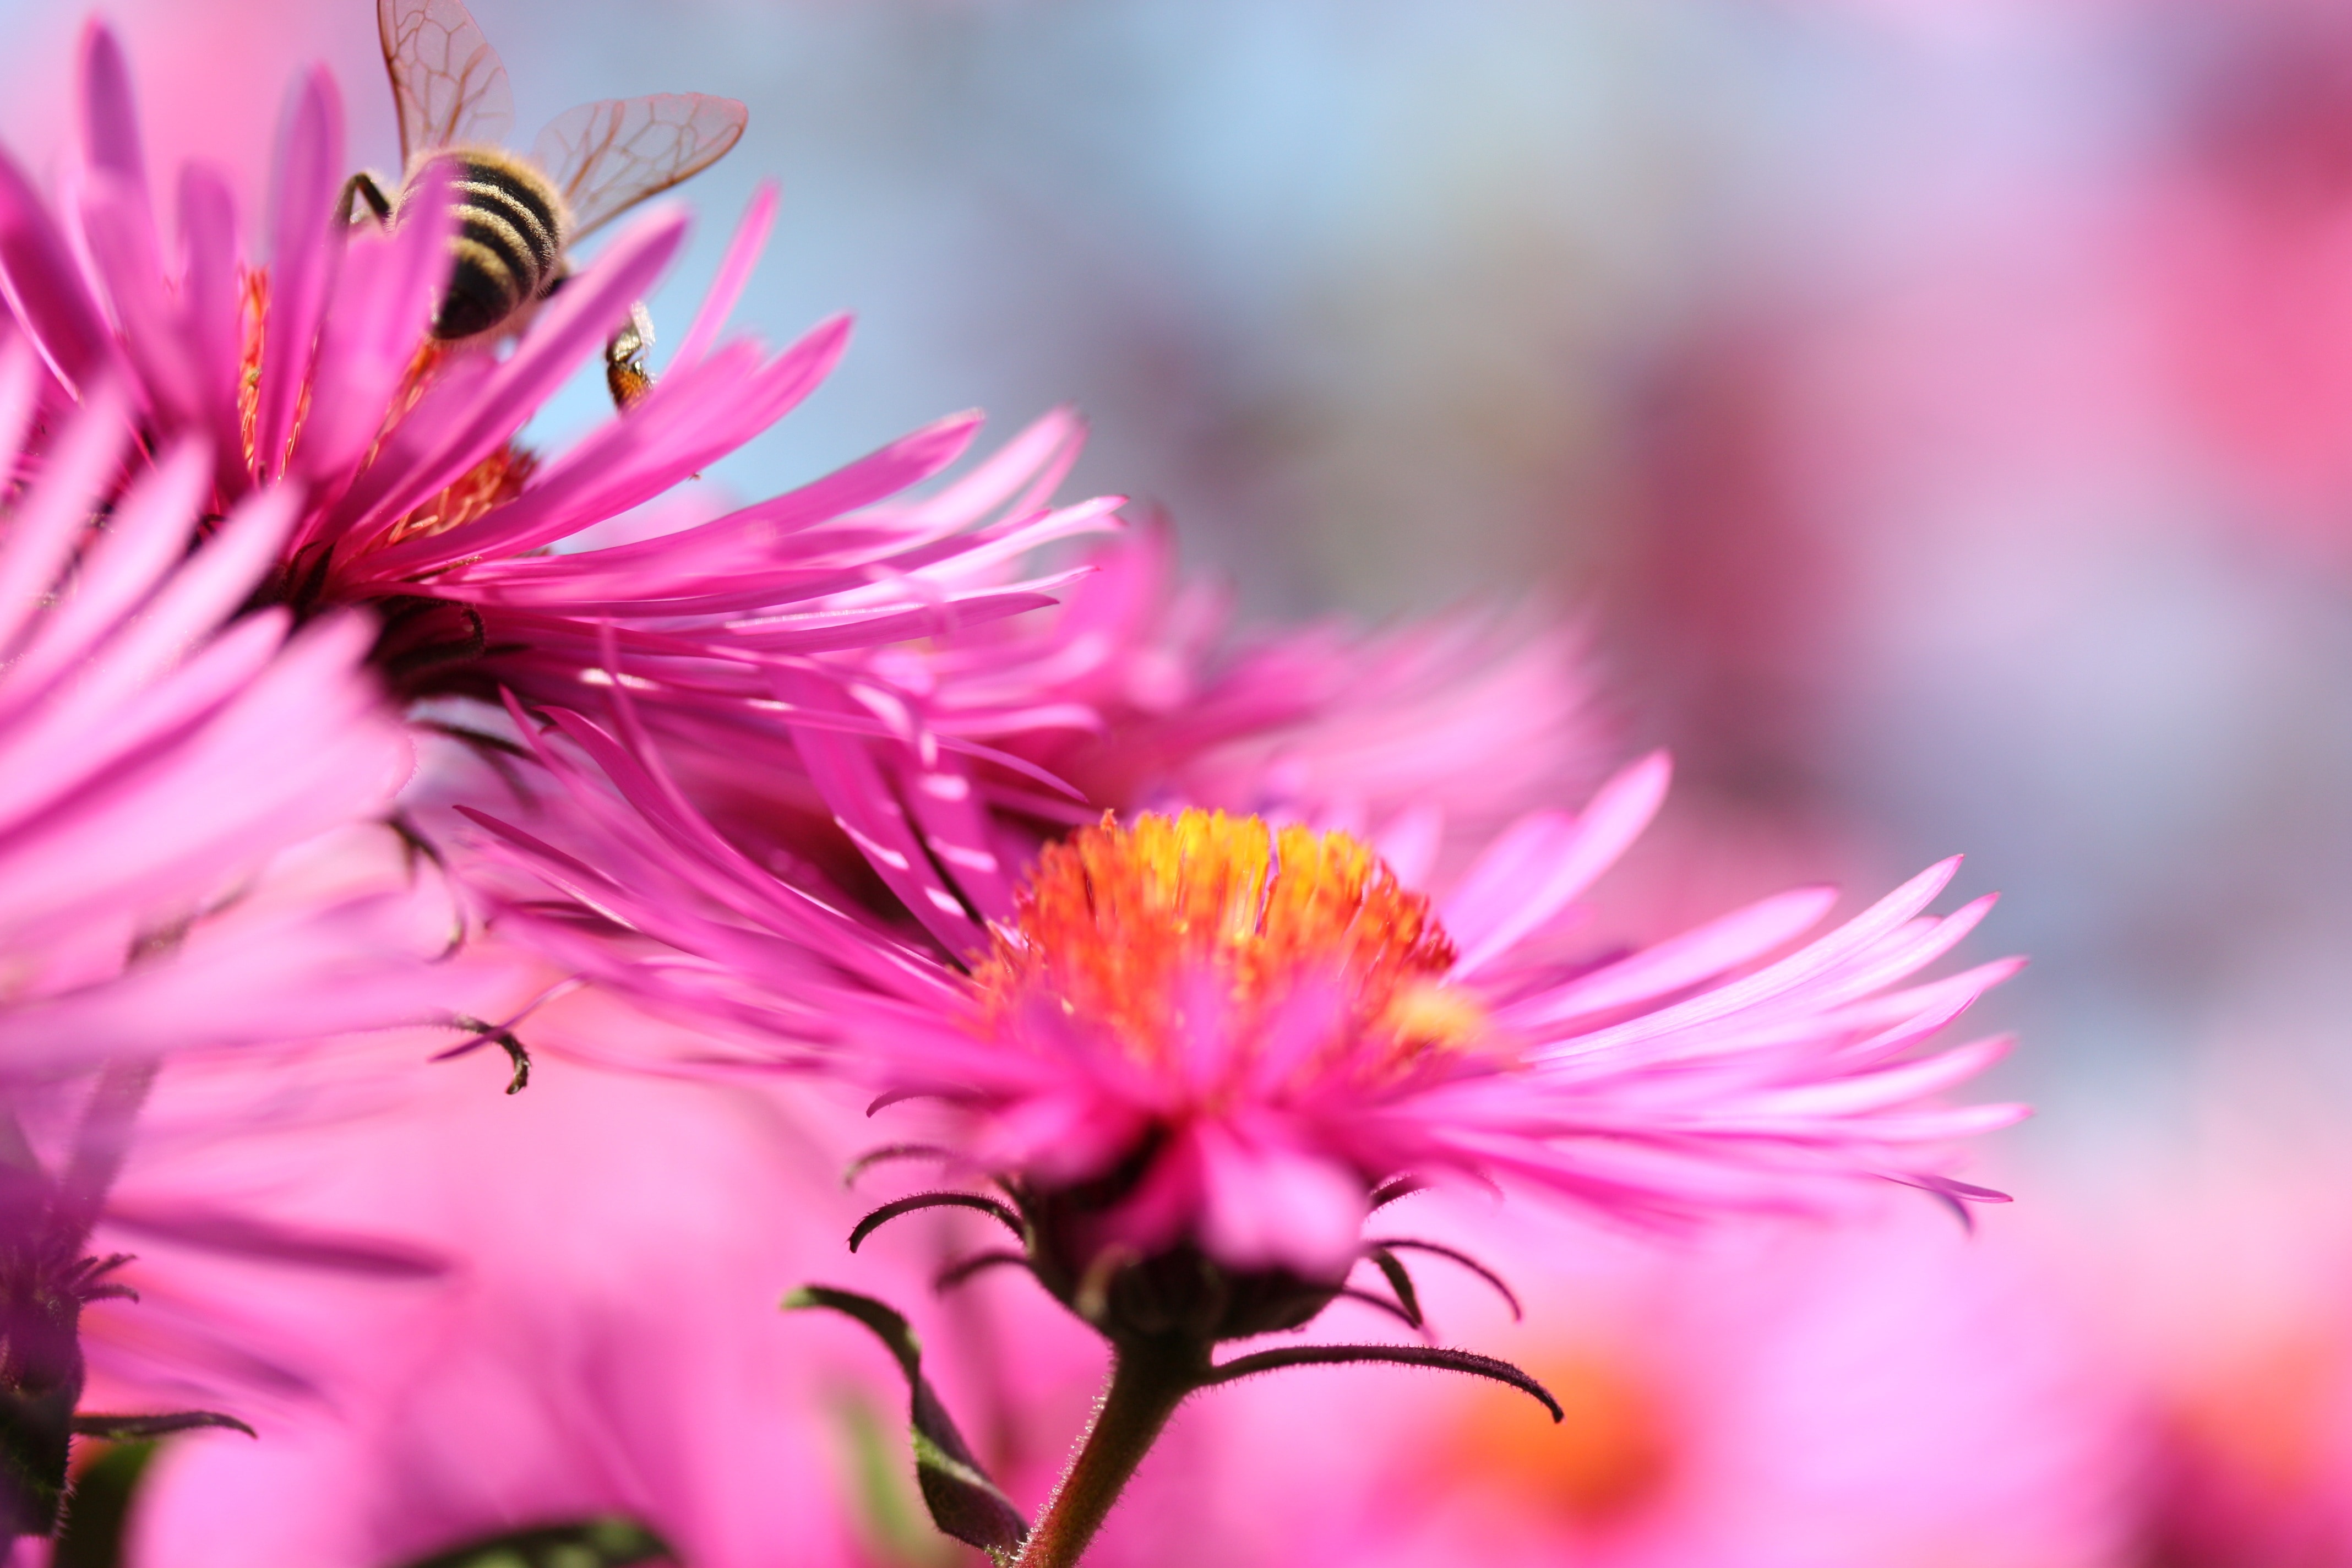 bumble bee on a pink petaled flower close up photo